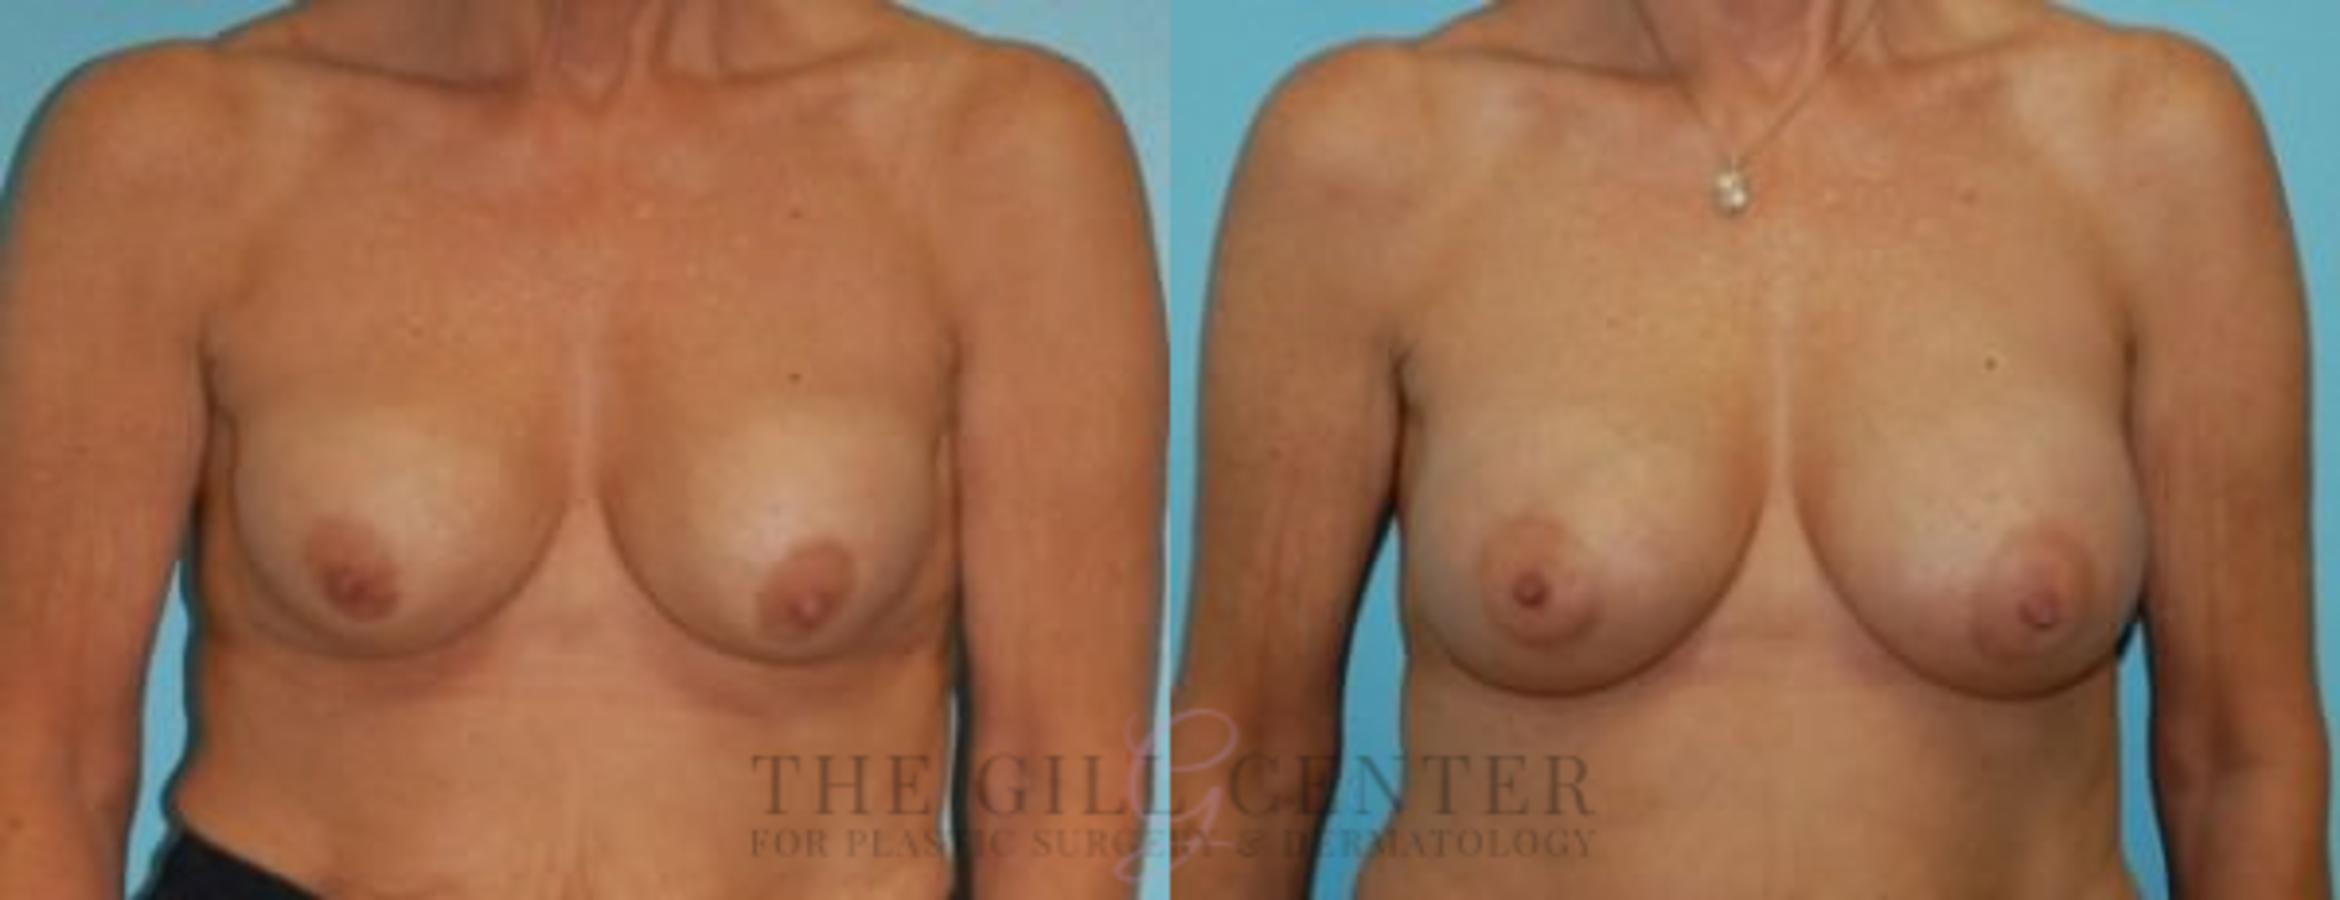 Breast Revision Case 383 Before & After Front | The Woodlands, TX | The Gill Center for Plastic Surgery and Dermatology